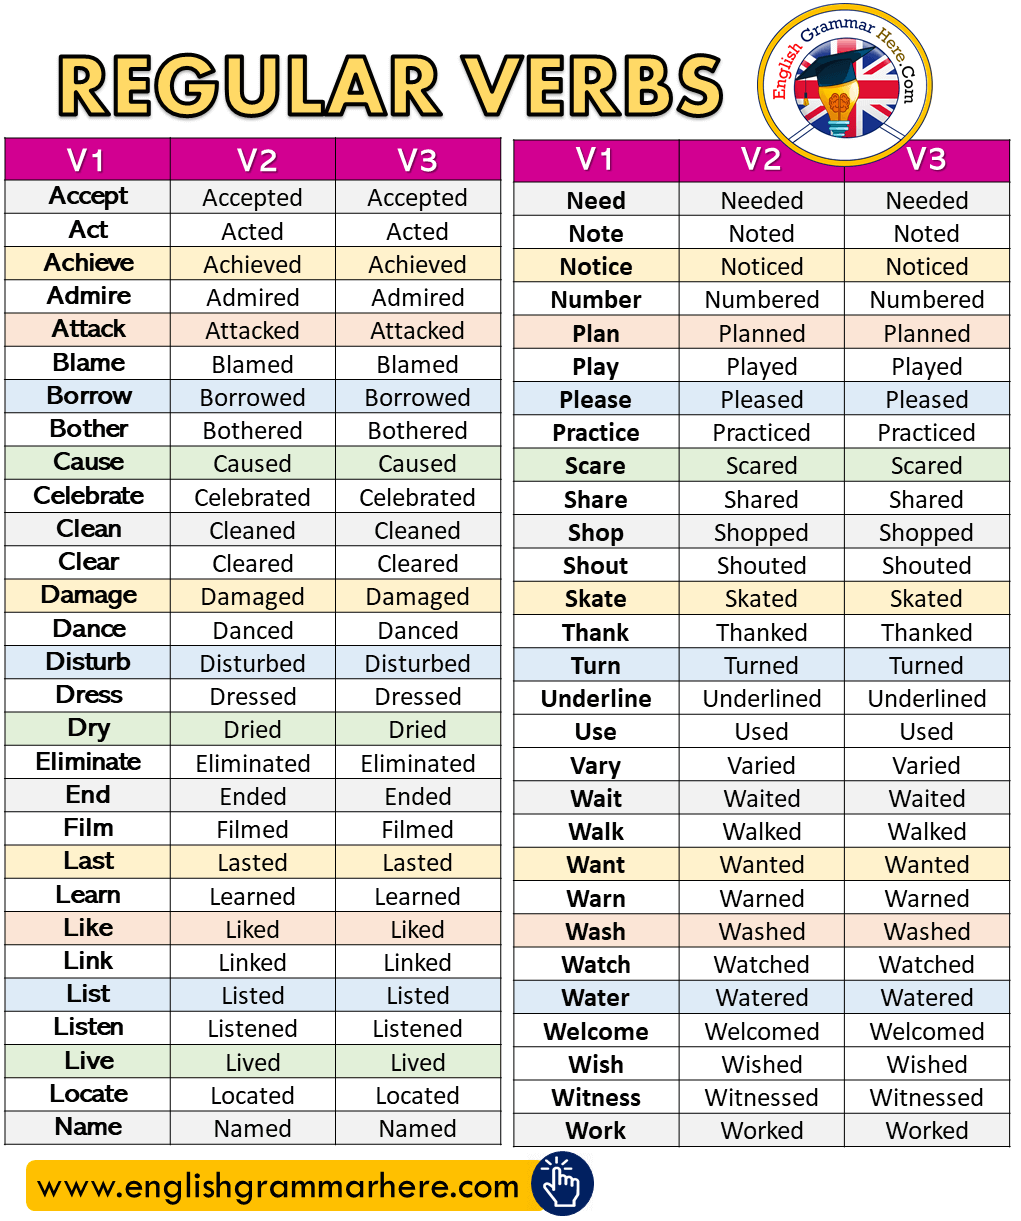 Detailed Regular Verbs List in English with V1, V2, V3, Present, Past, Past Participle